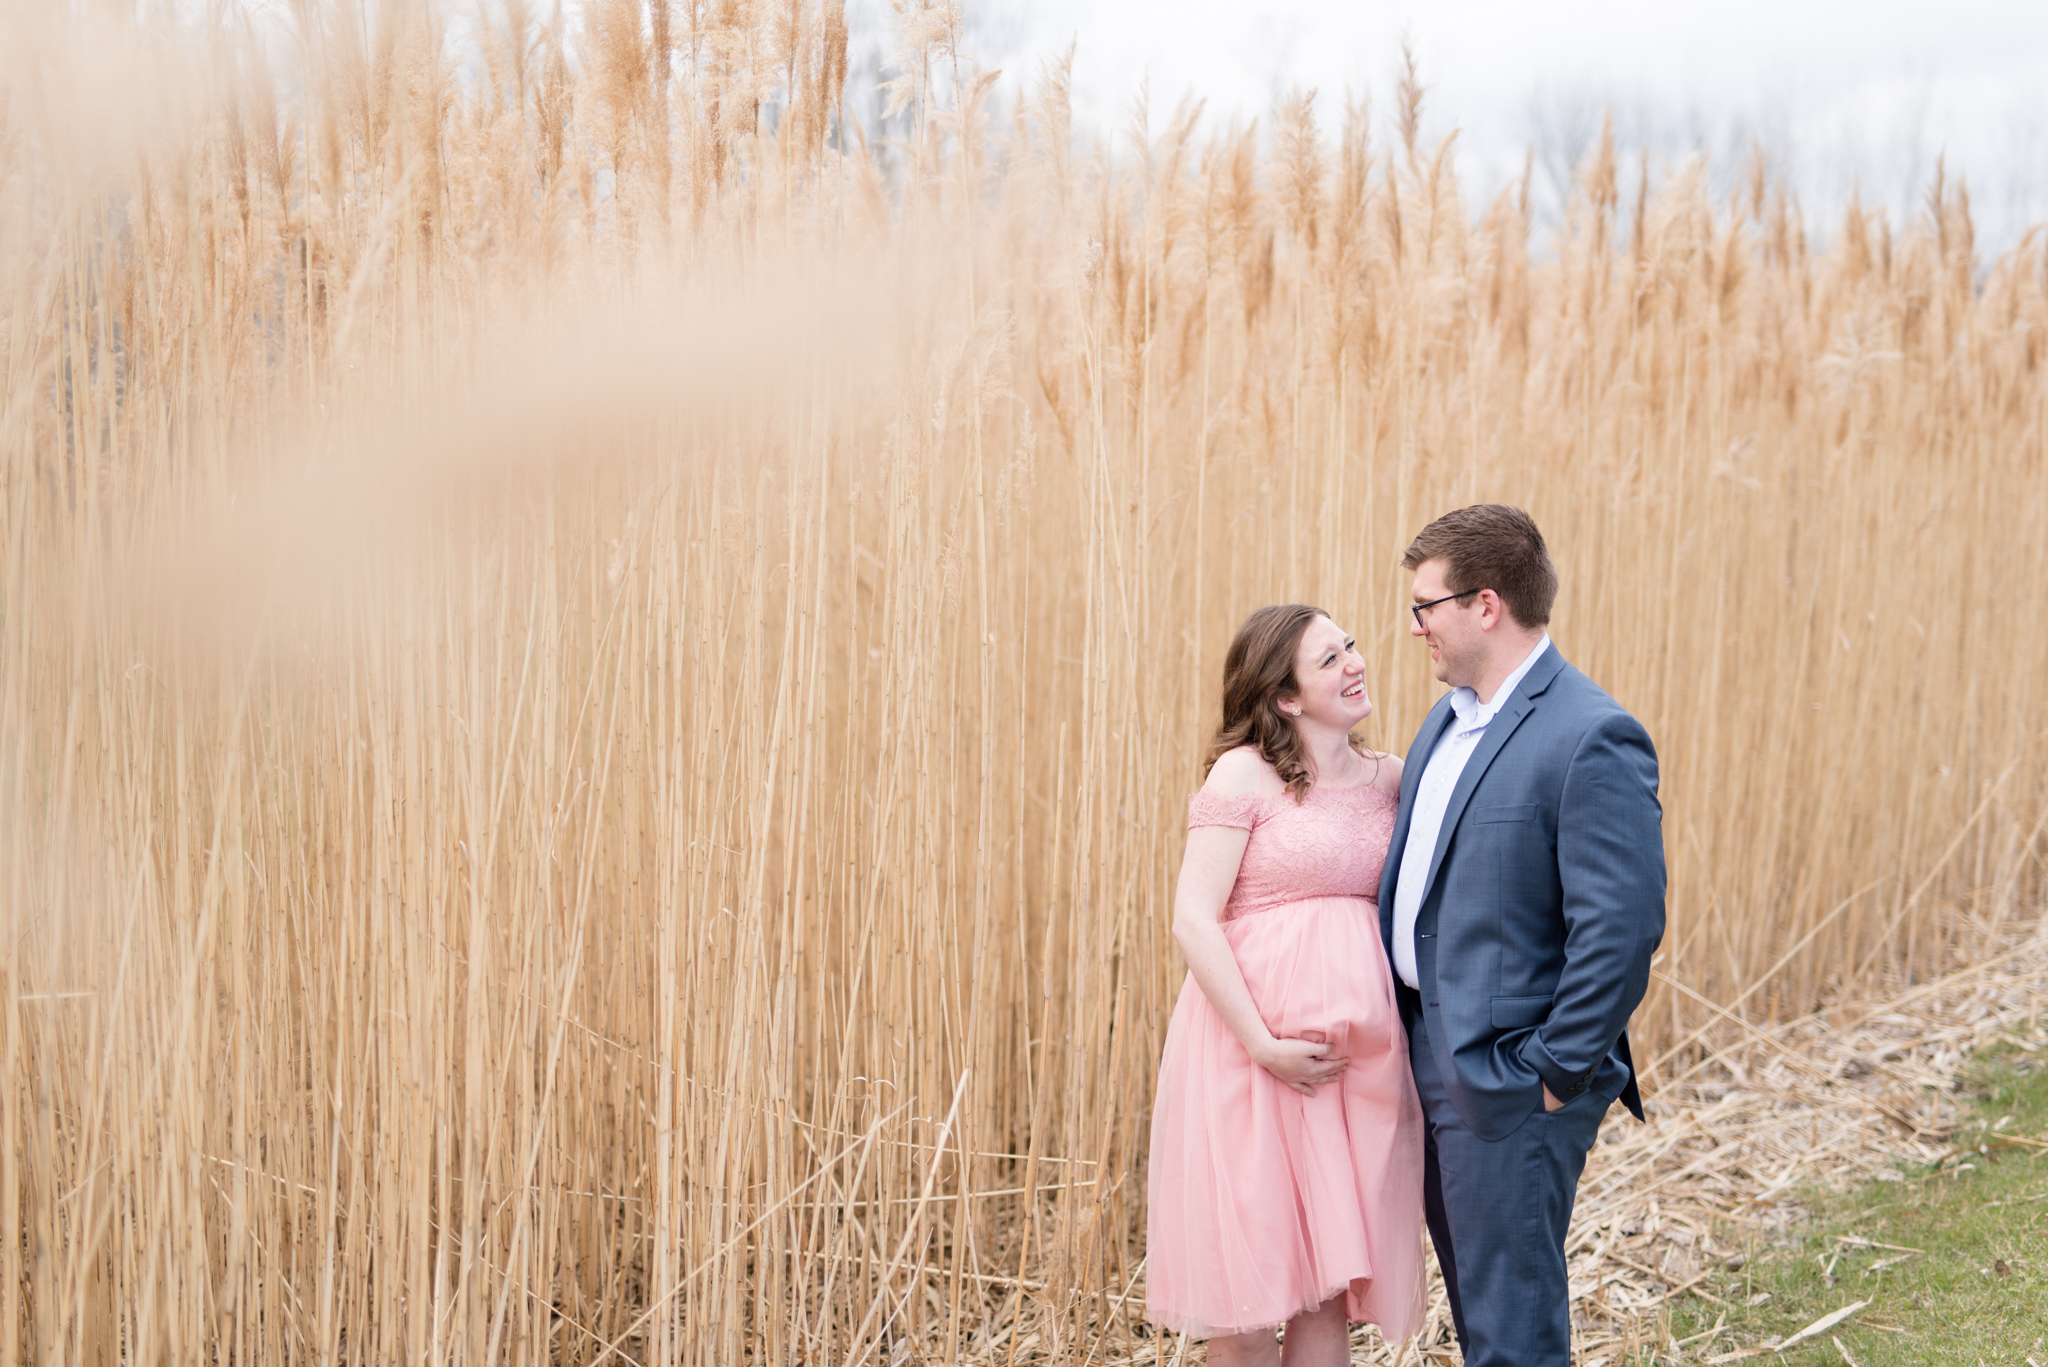 expecting parents laugh next to wheat field.